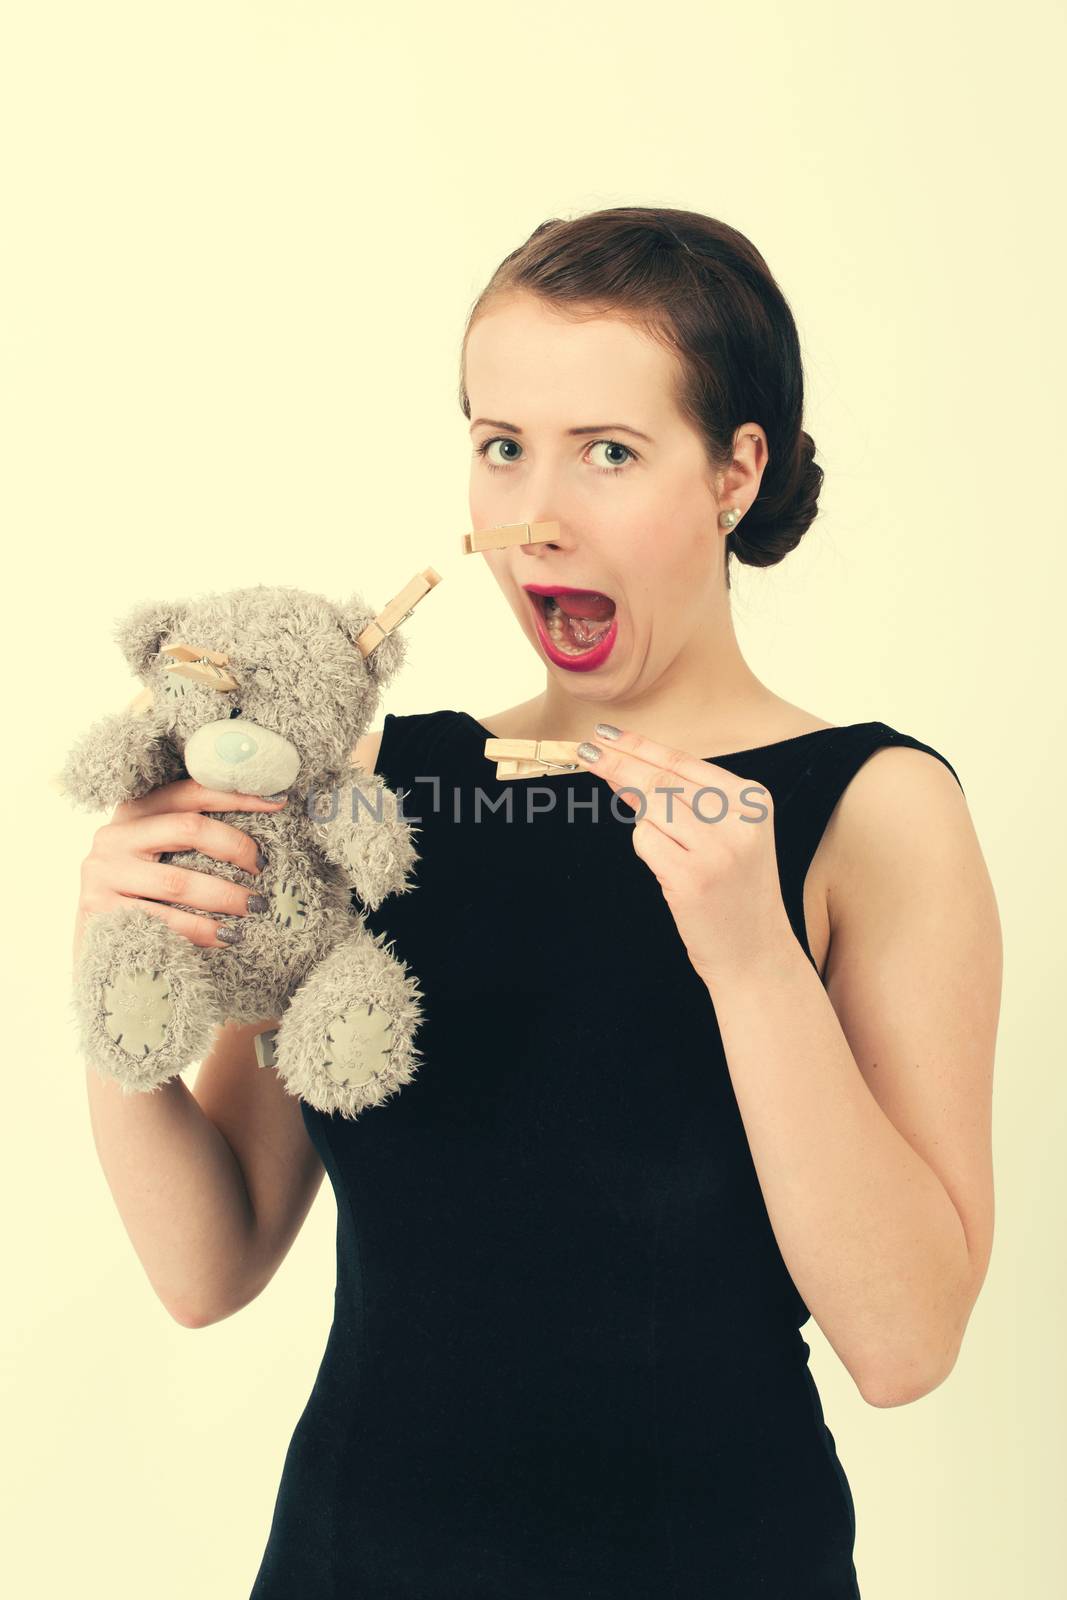 attractive smiling brunette holding teddy bear grimacing with peg on nose in a black dress, retro color